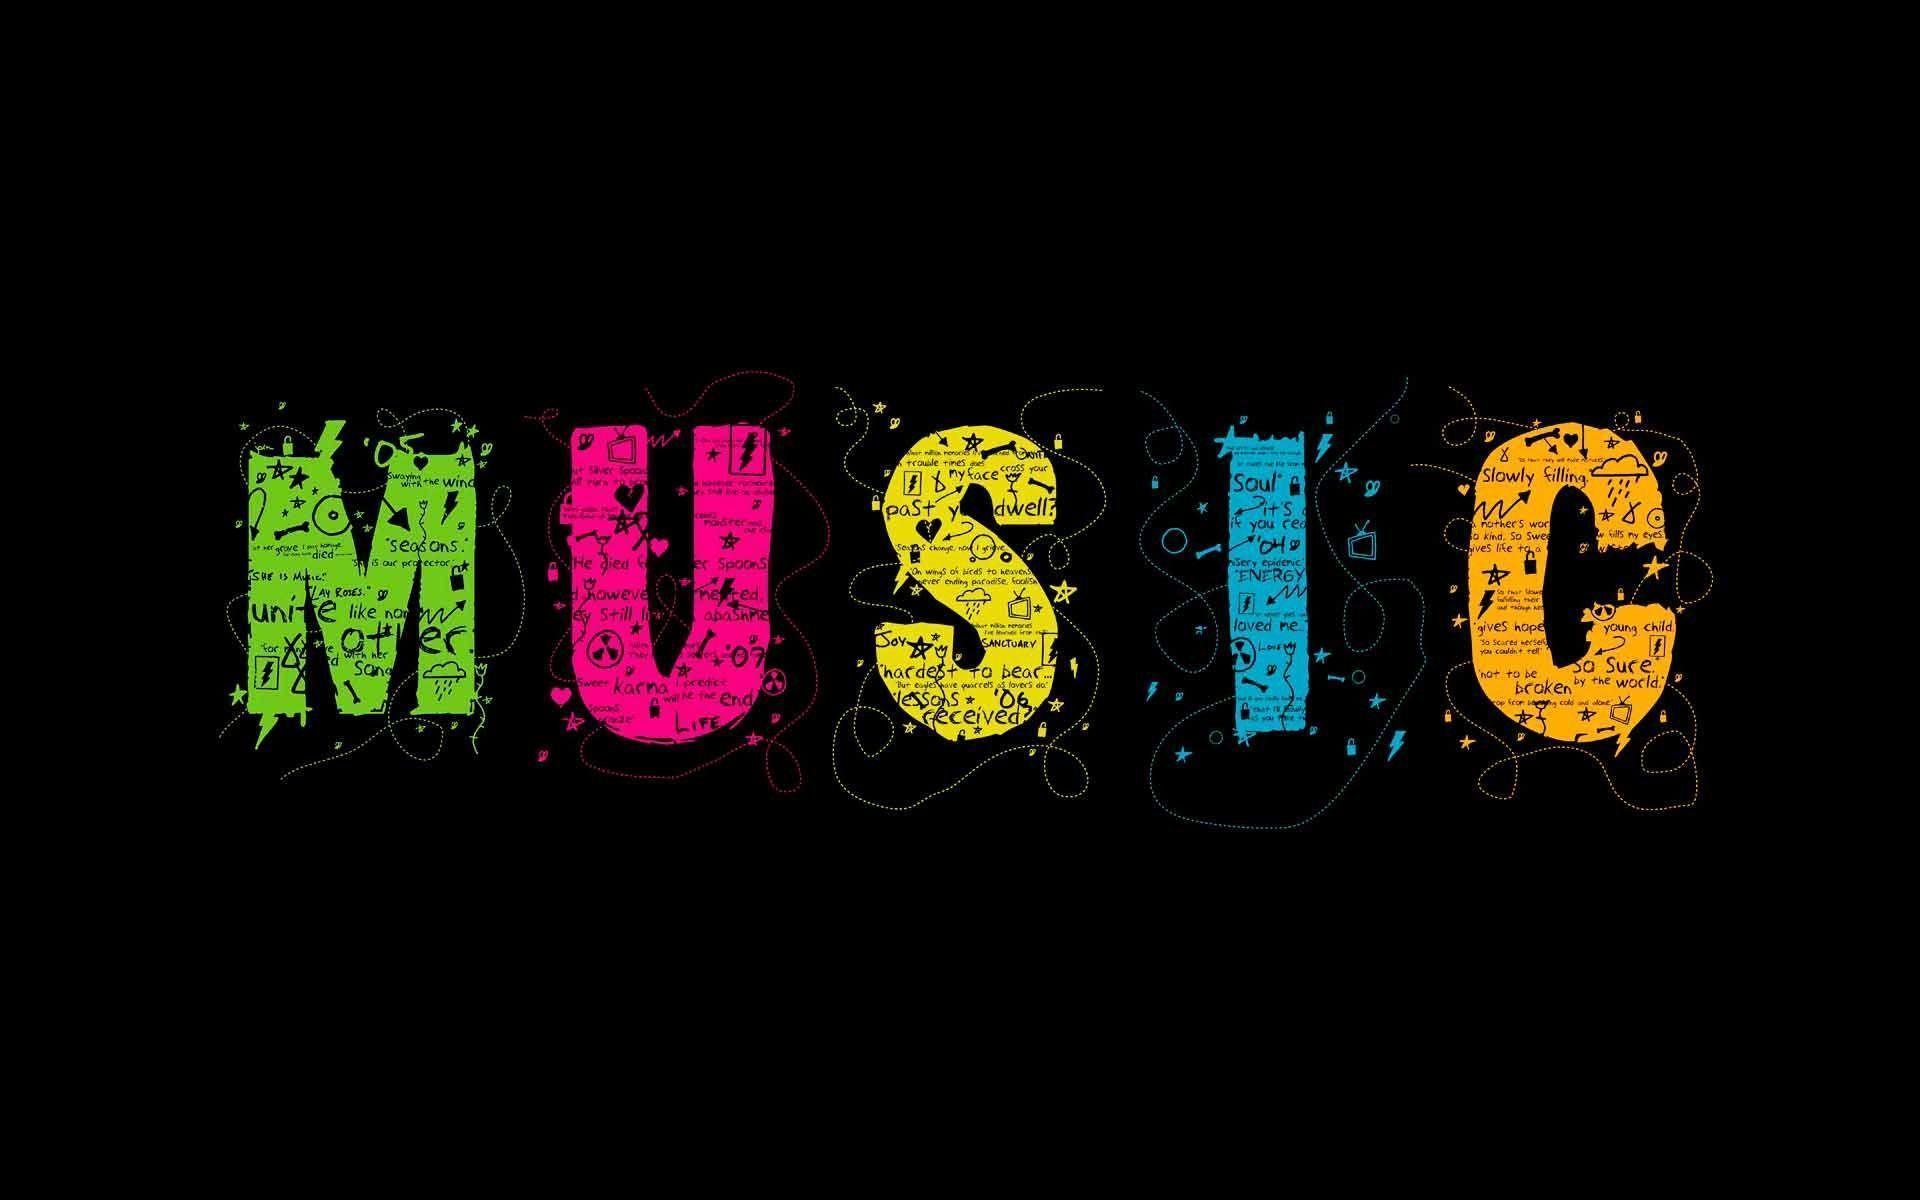 Music is Life wallpaper, music and dance wallpaper